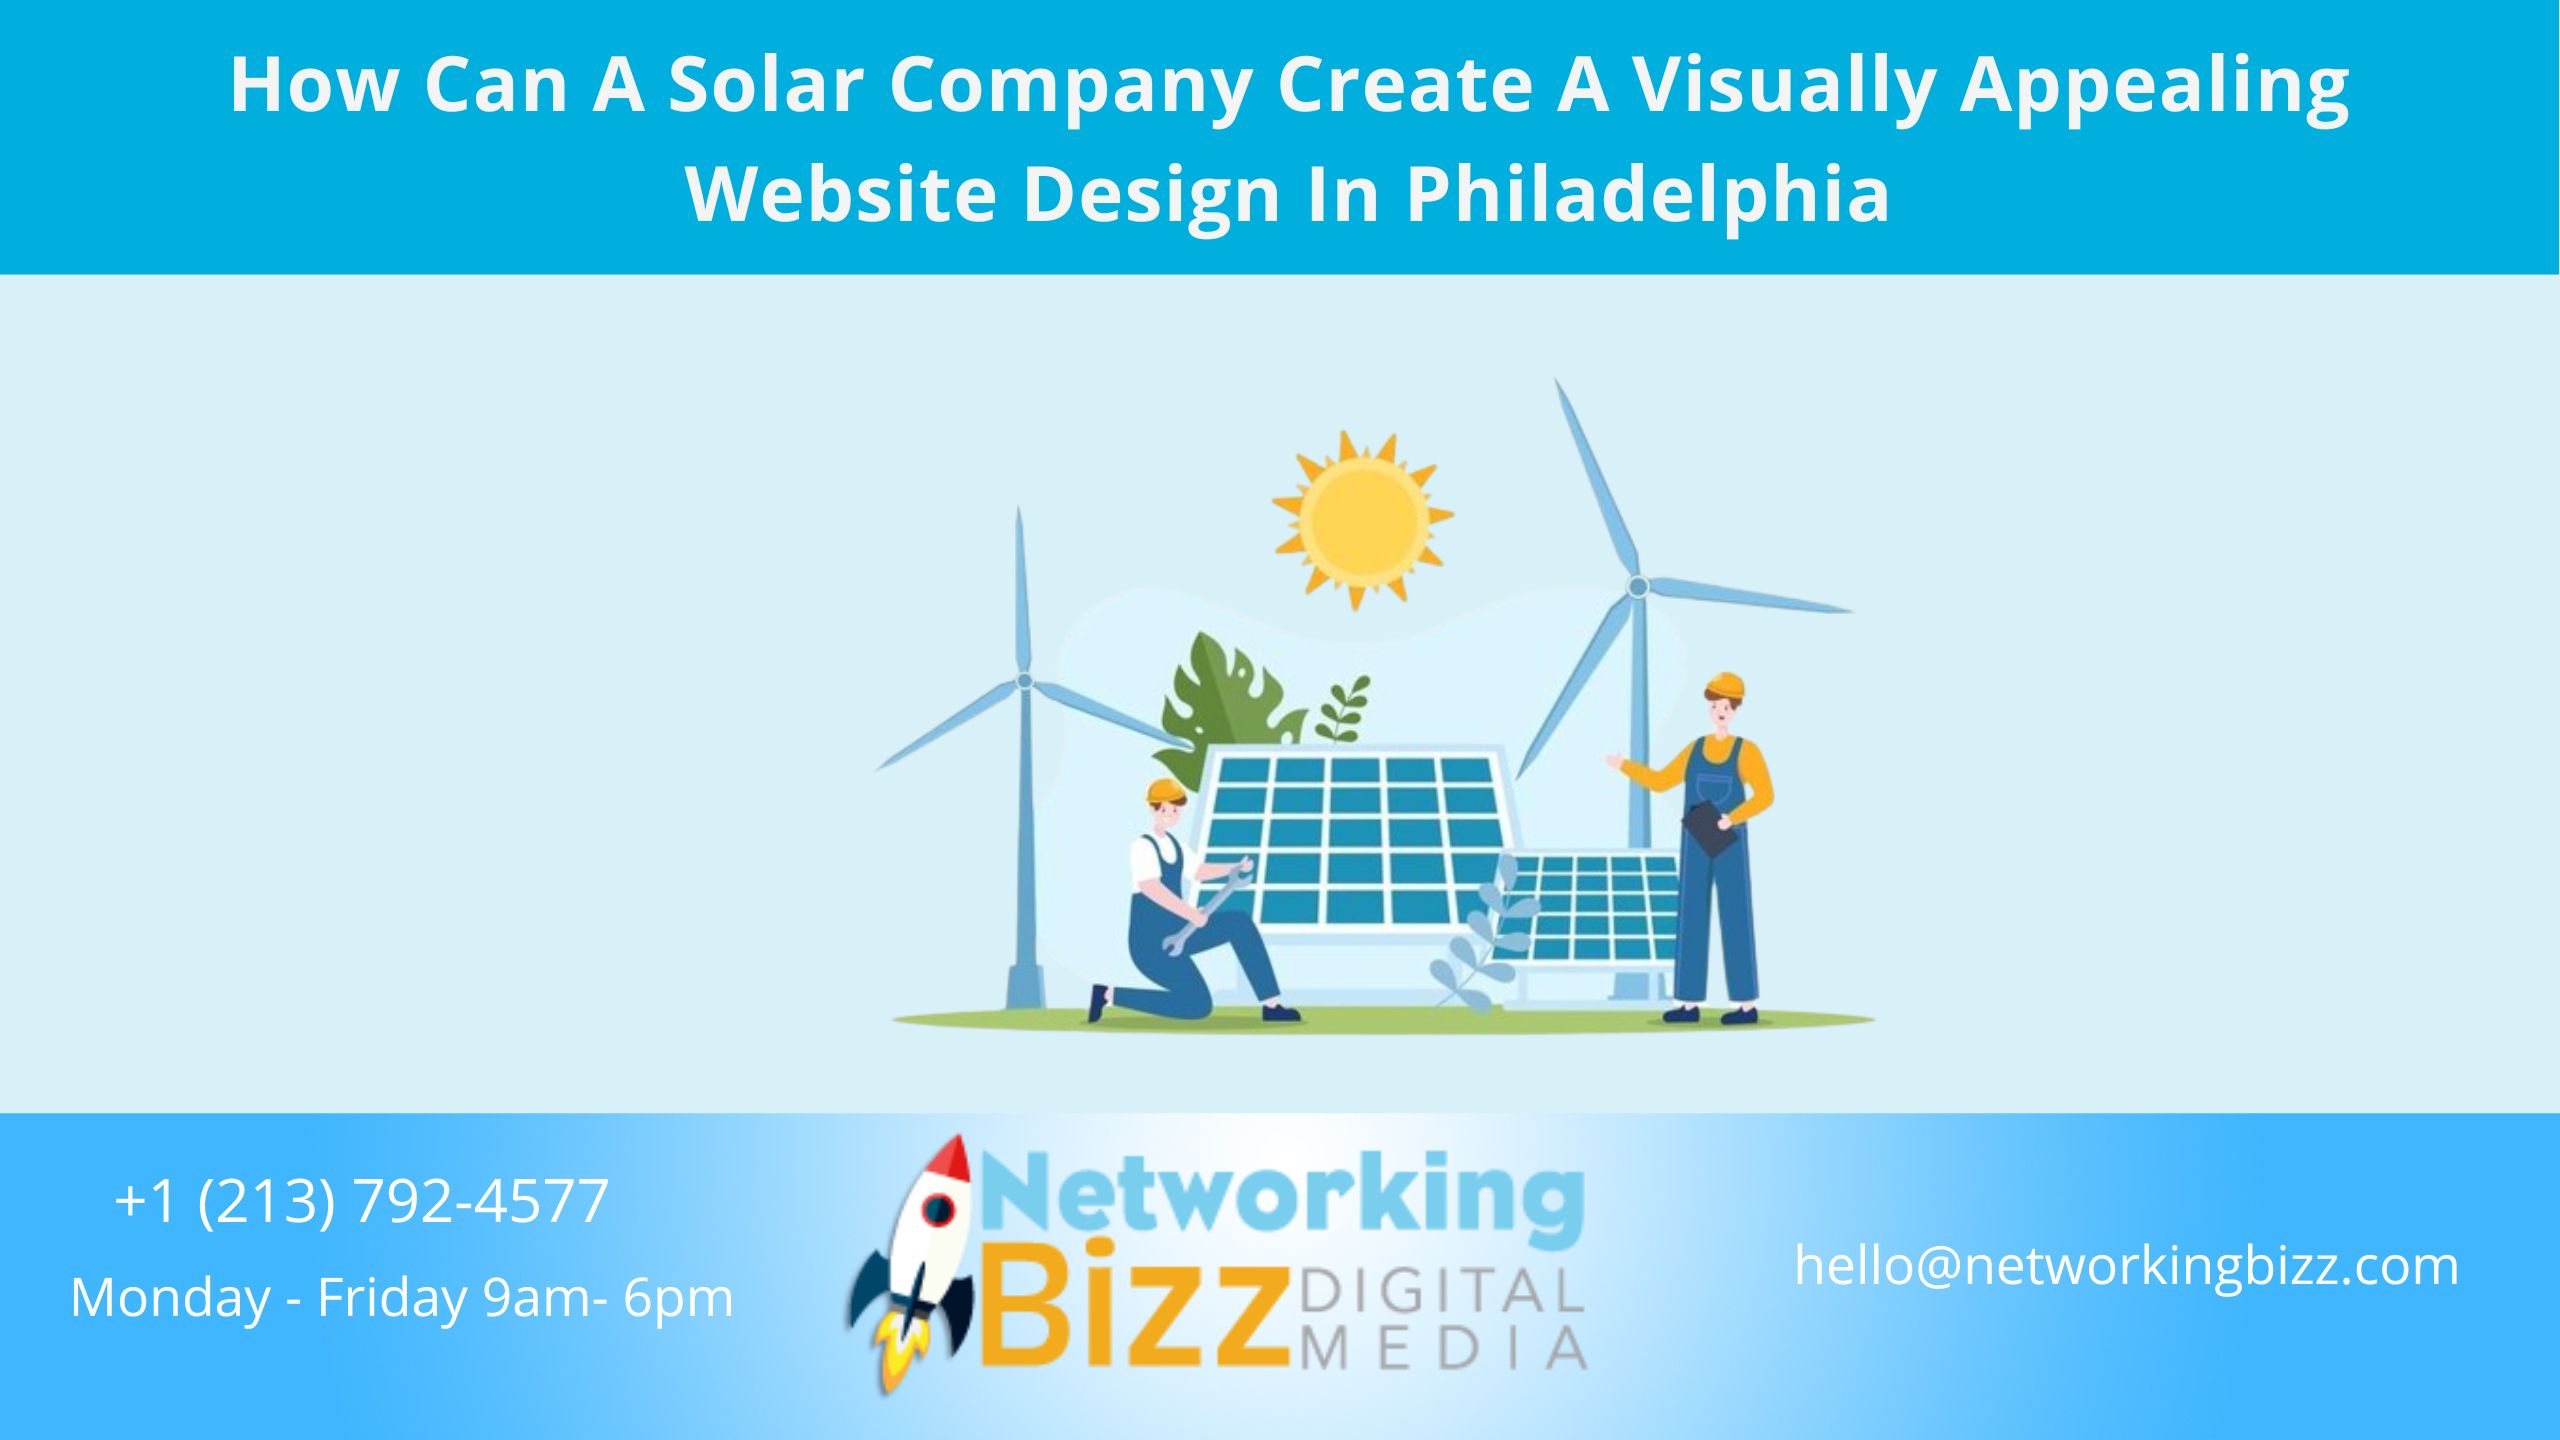 How Can A Solar Company Create A Visually Appealing Website Design In Philadelphia